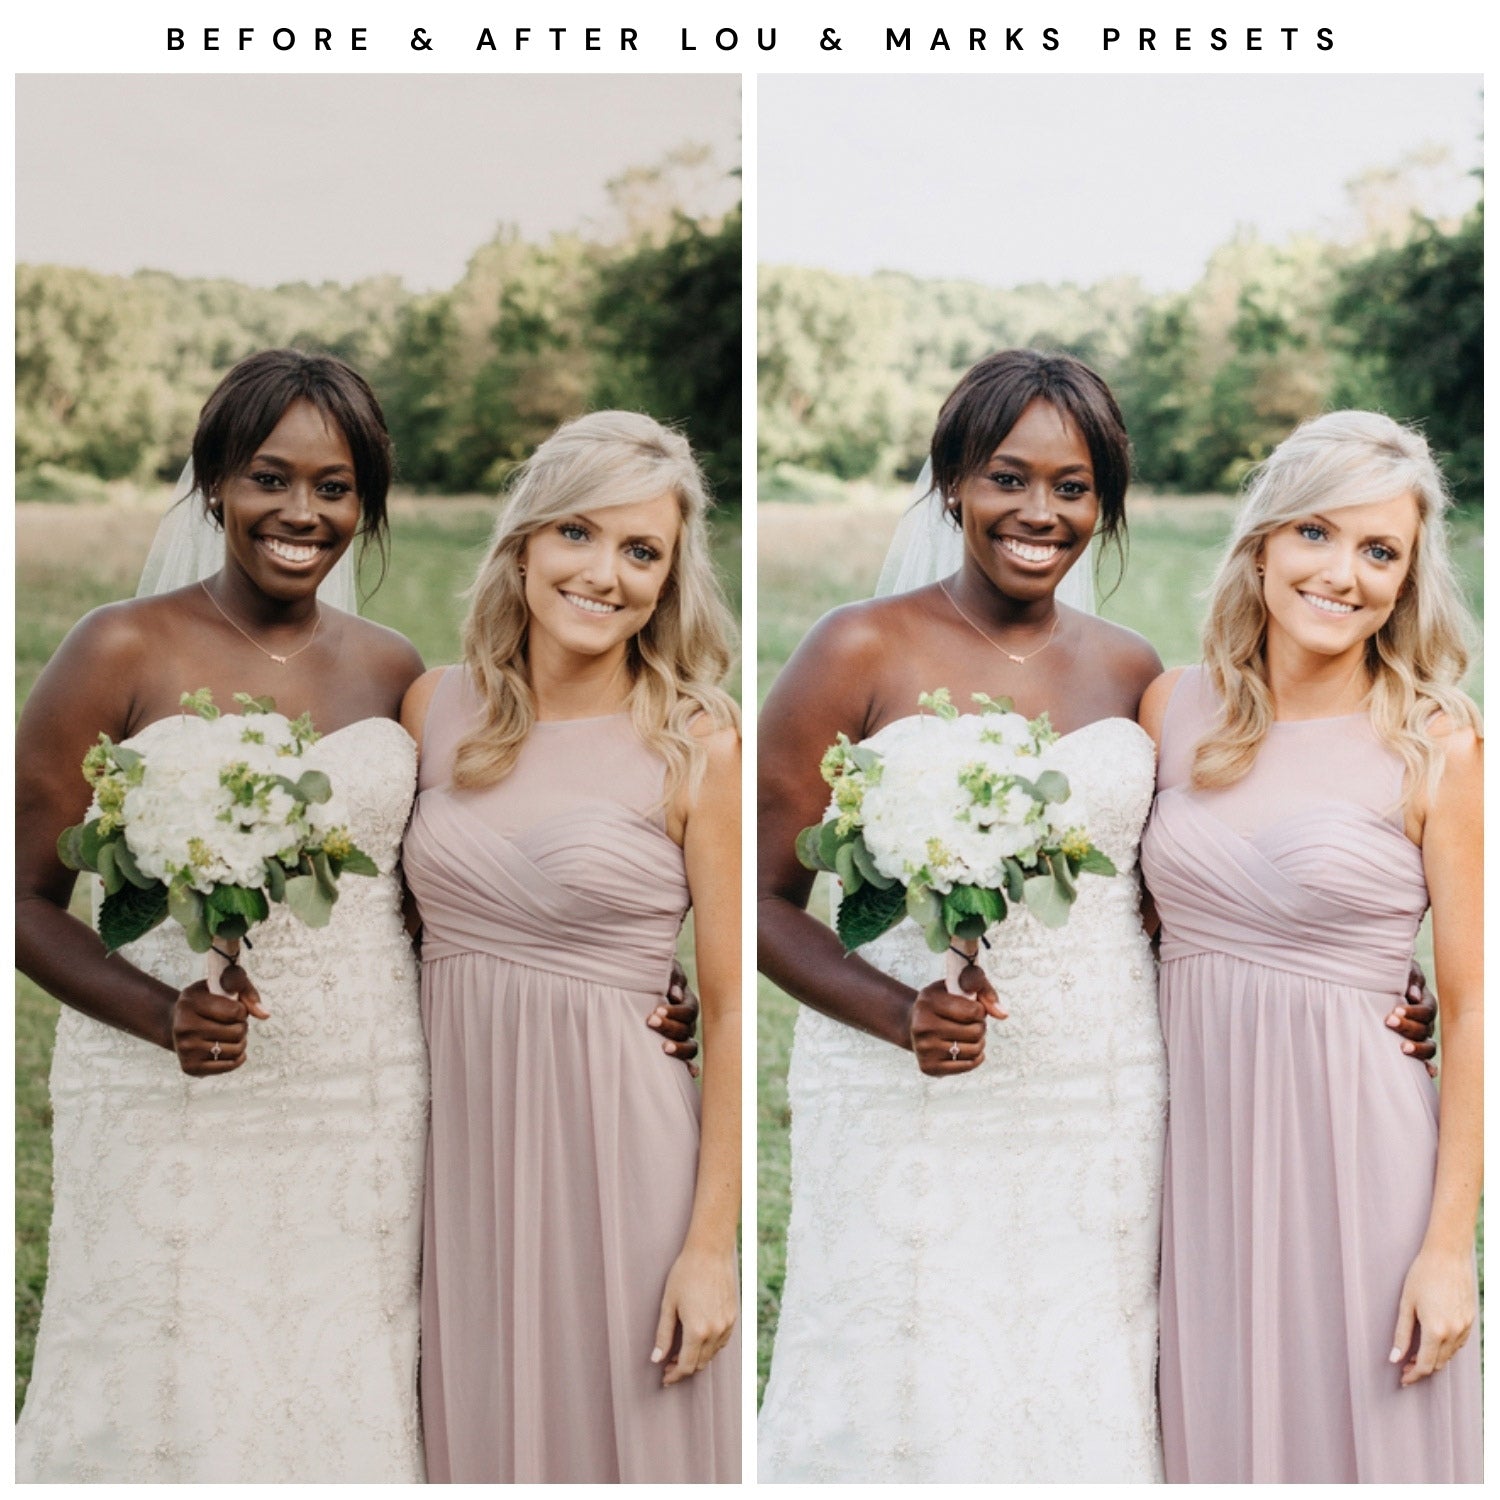 Lou & Marks Presets Light And Airy Lightroom Presets Bundle The Best Presets Wedding Portriats